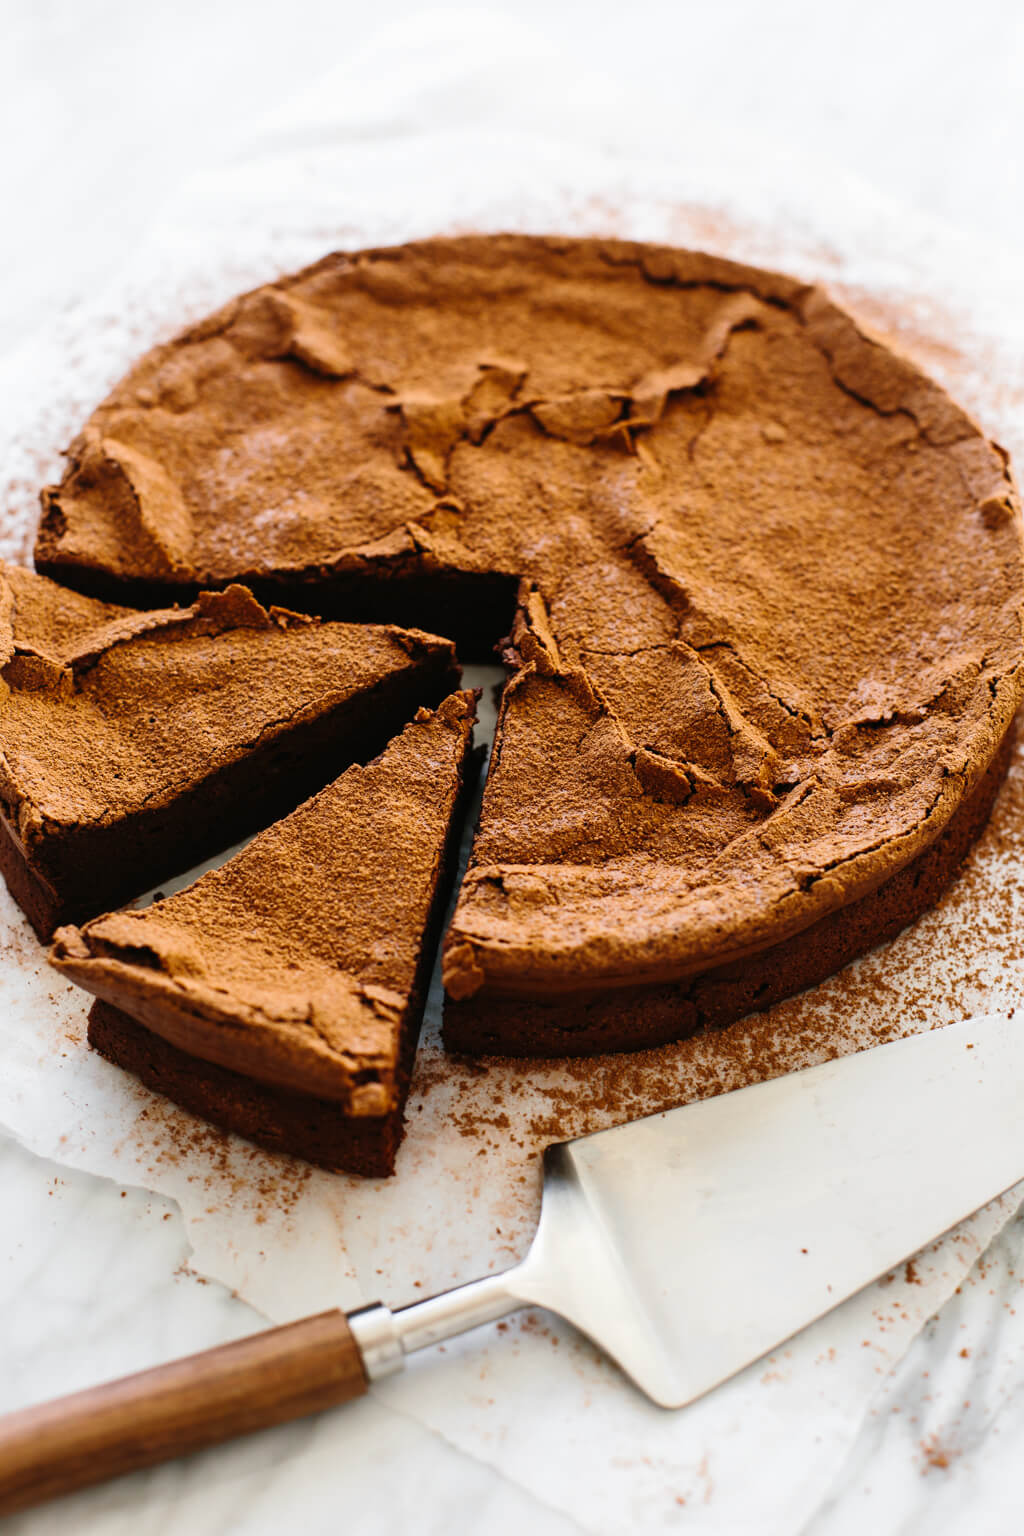 Flourless chocolate cake that's gluten-free, paleo and easy! It's the best flourless chocolate cake recipe and only has 5 ingredients!